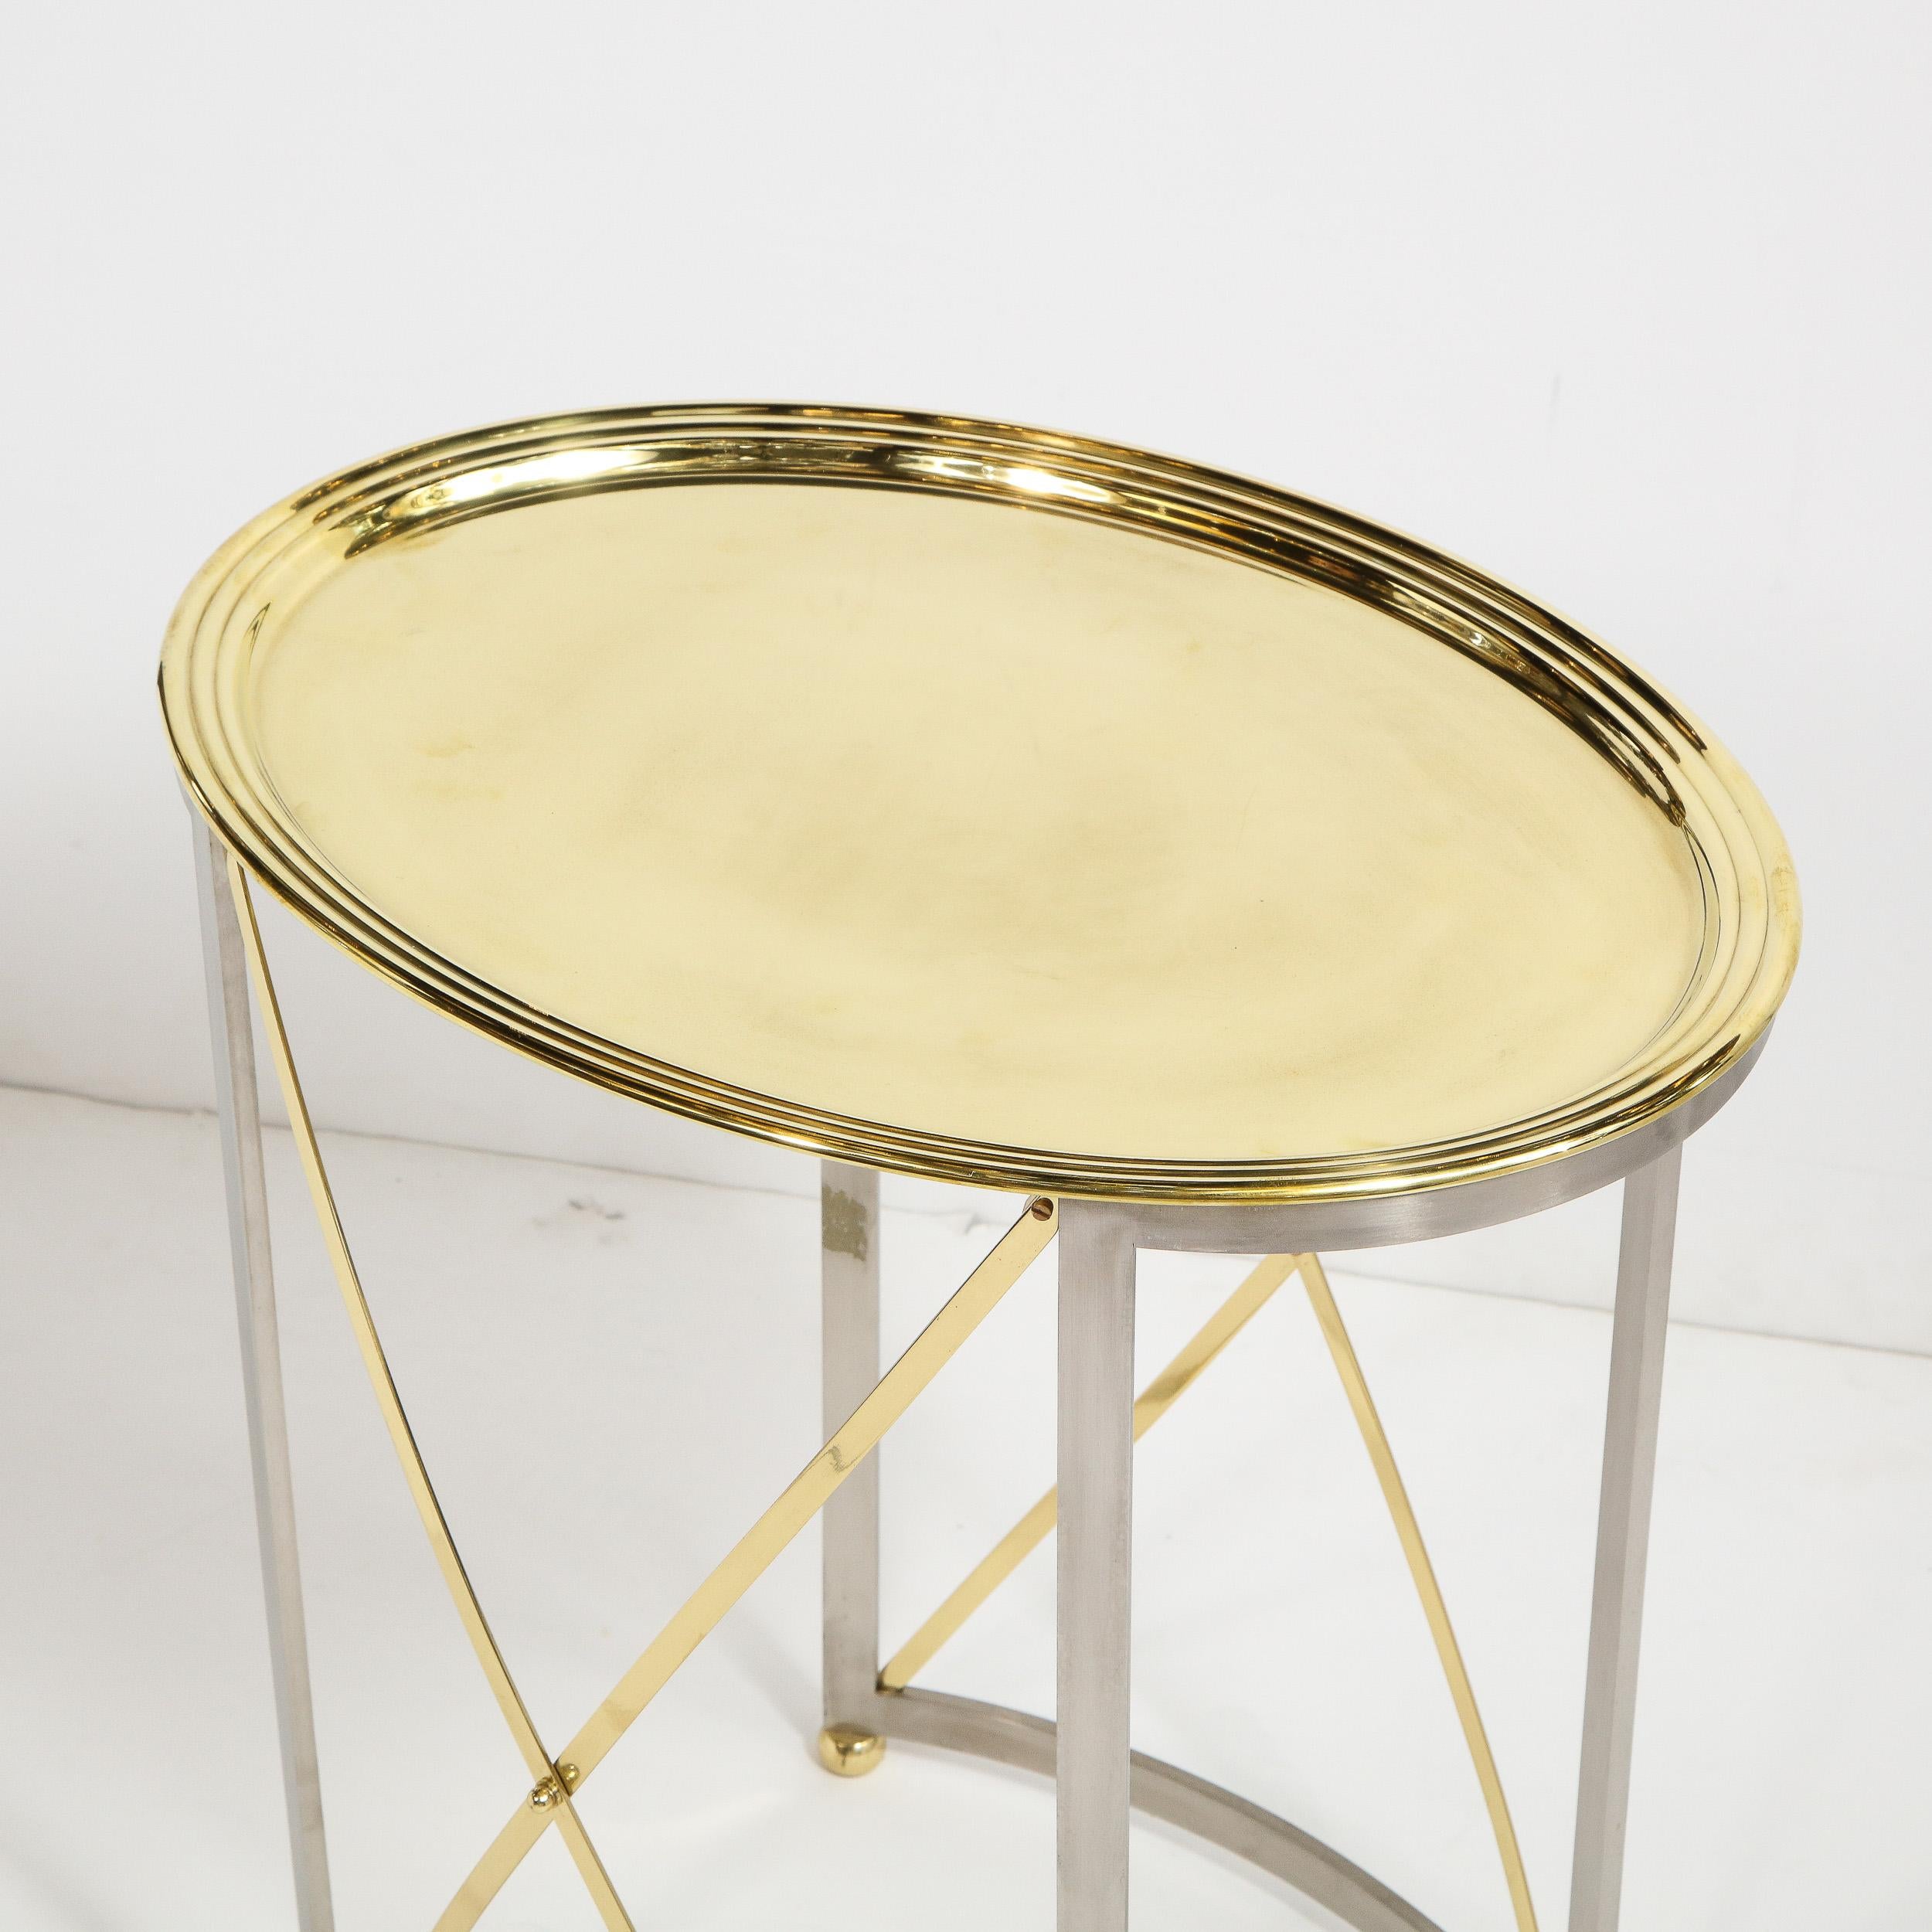 French Mid-Century Brass & Nickel Side Table with Removable Tray Top by Maison Jansen